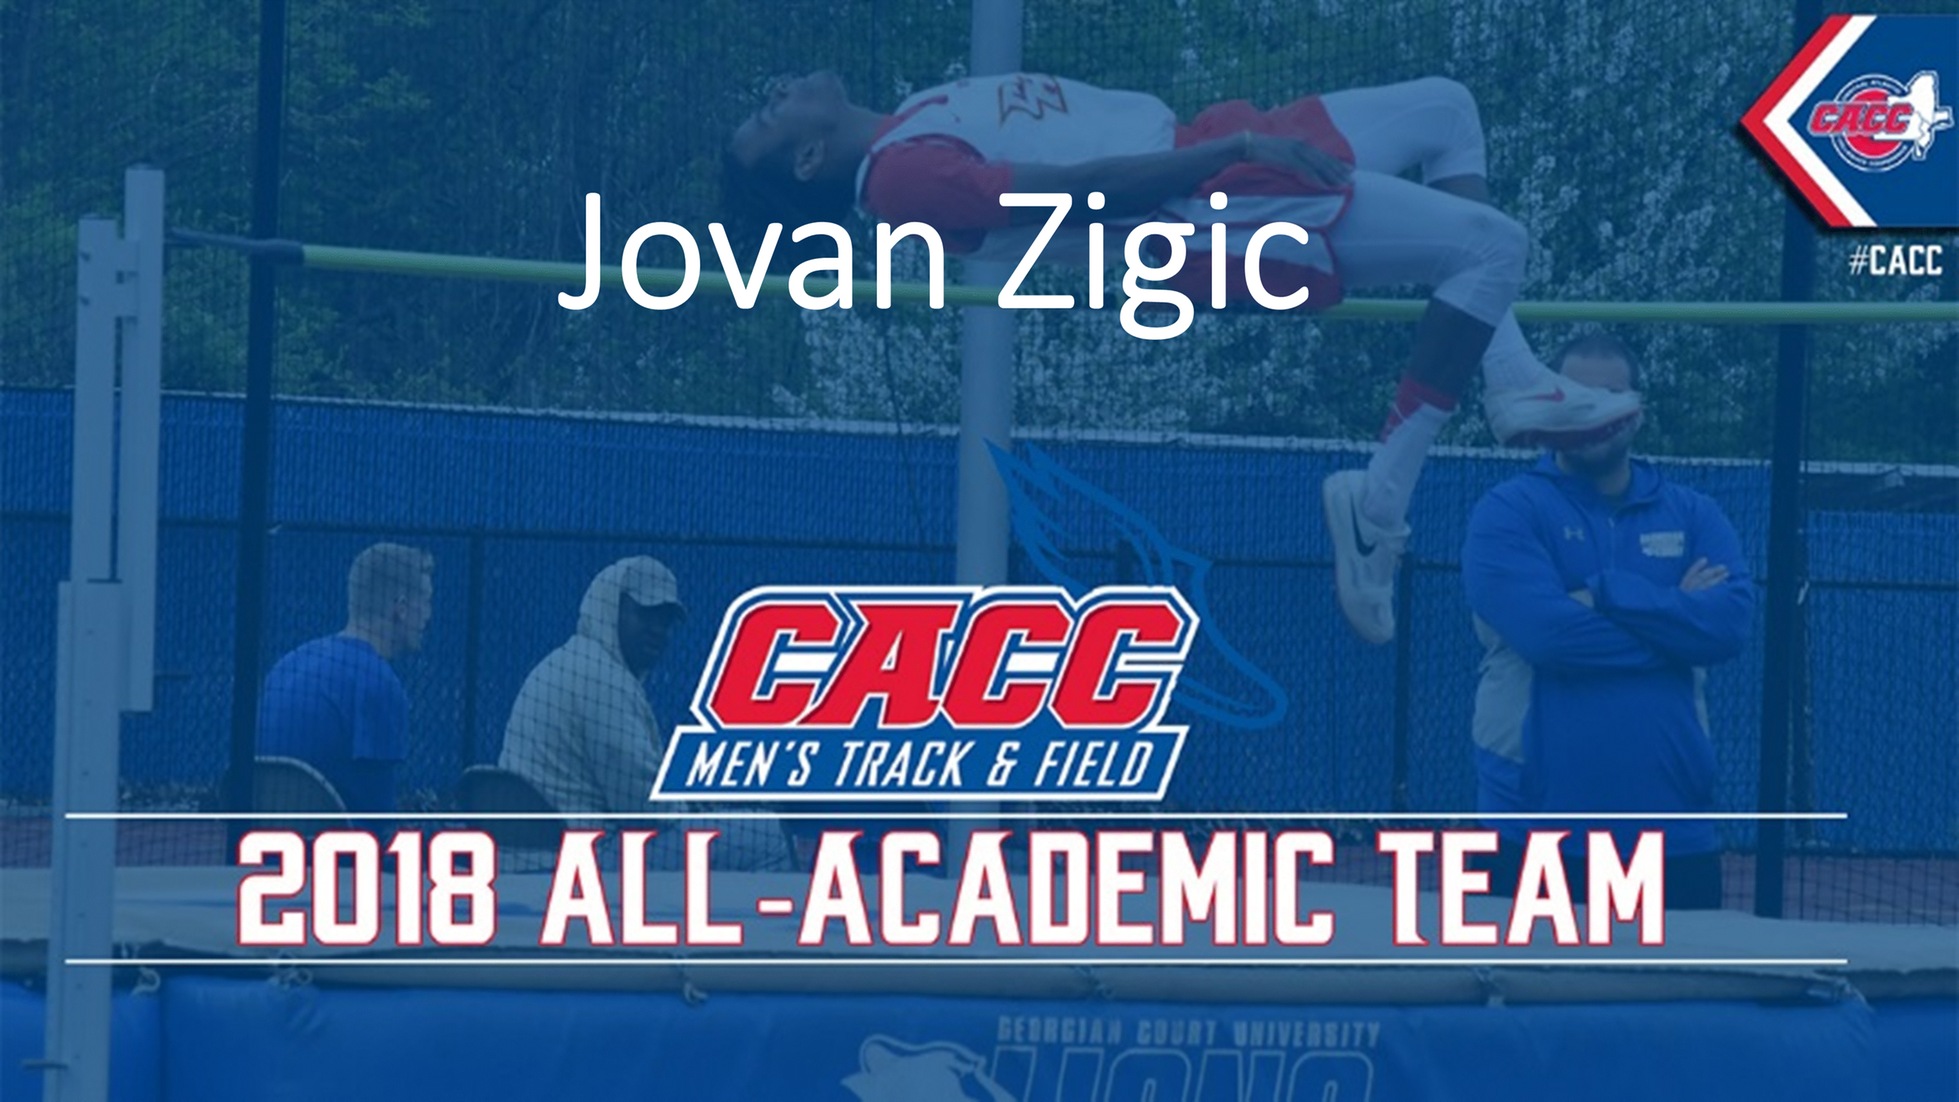 The CACC released the 2018 All-Academic Men's Track and Field Team.